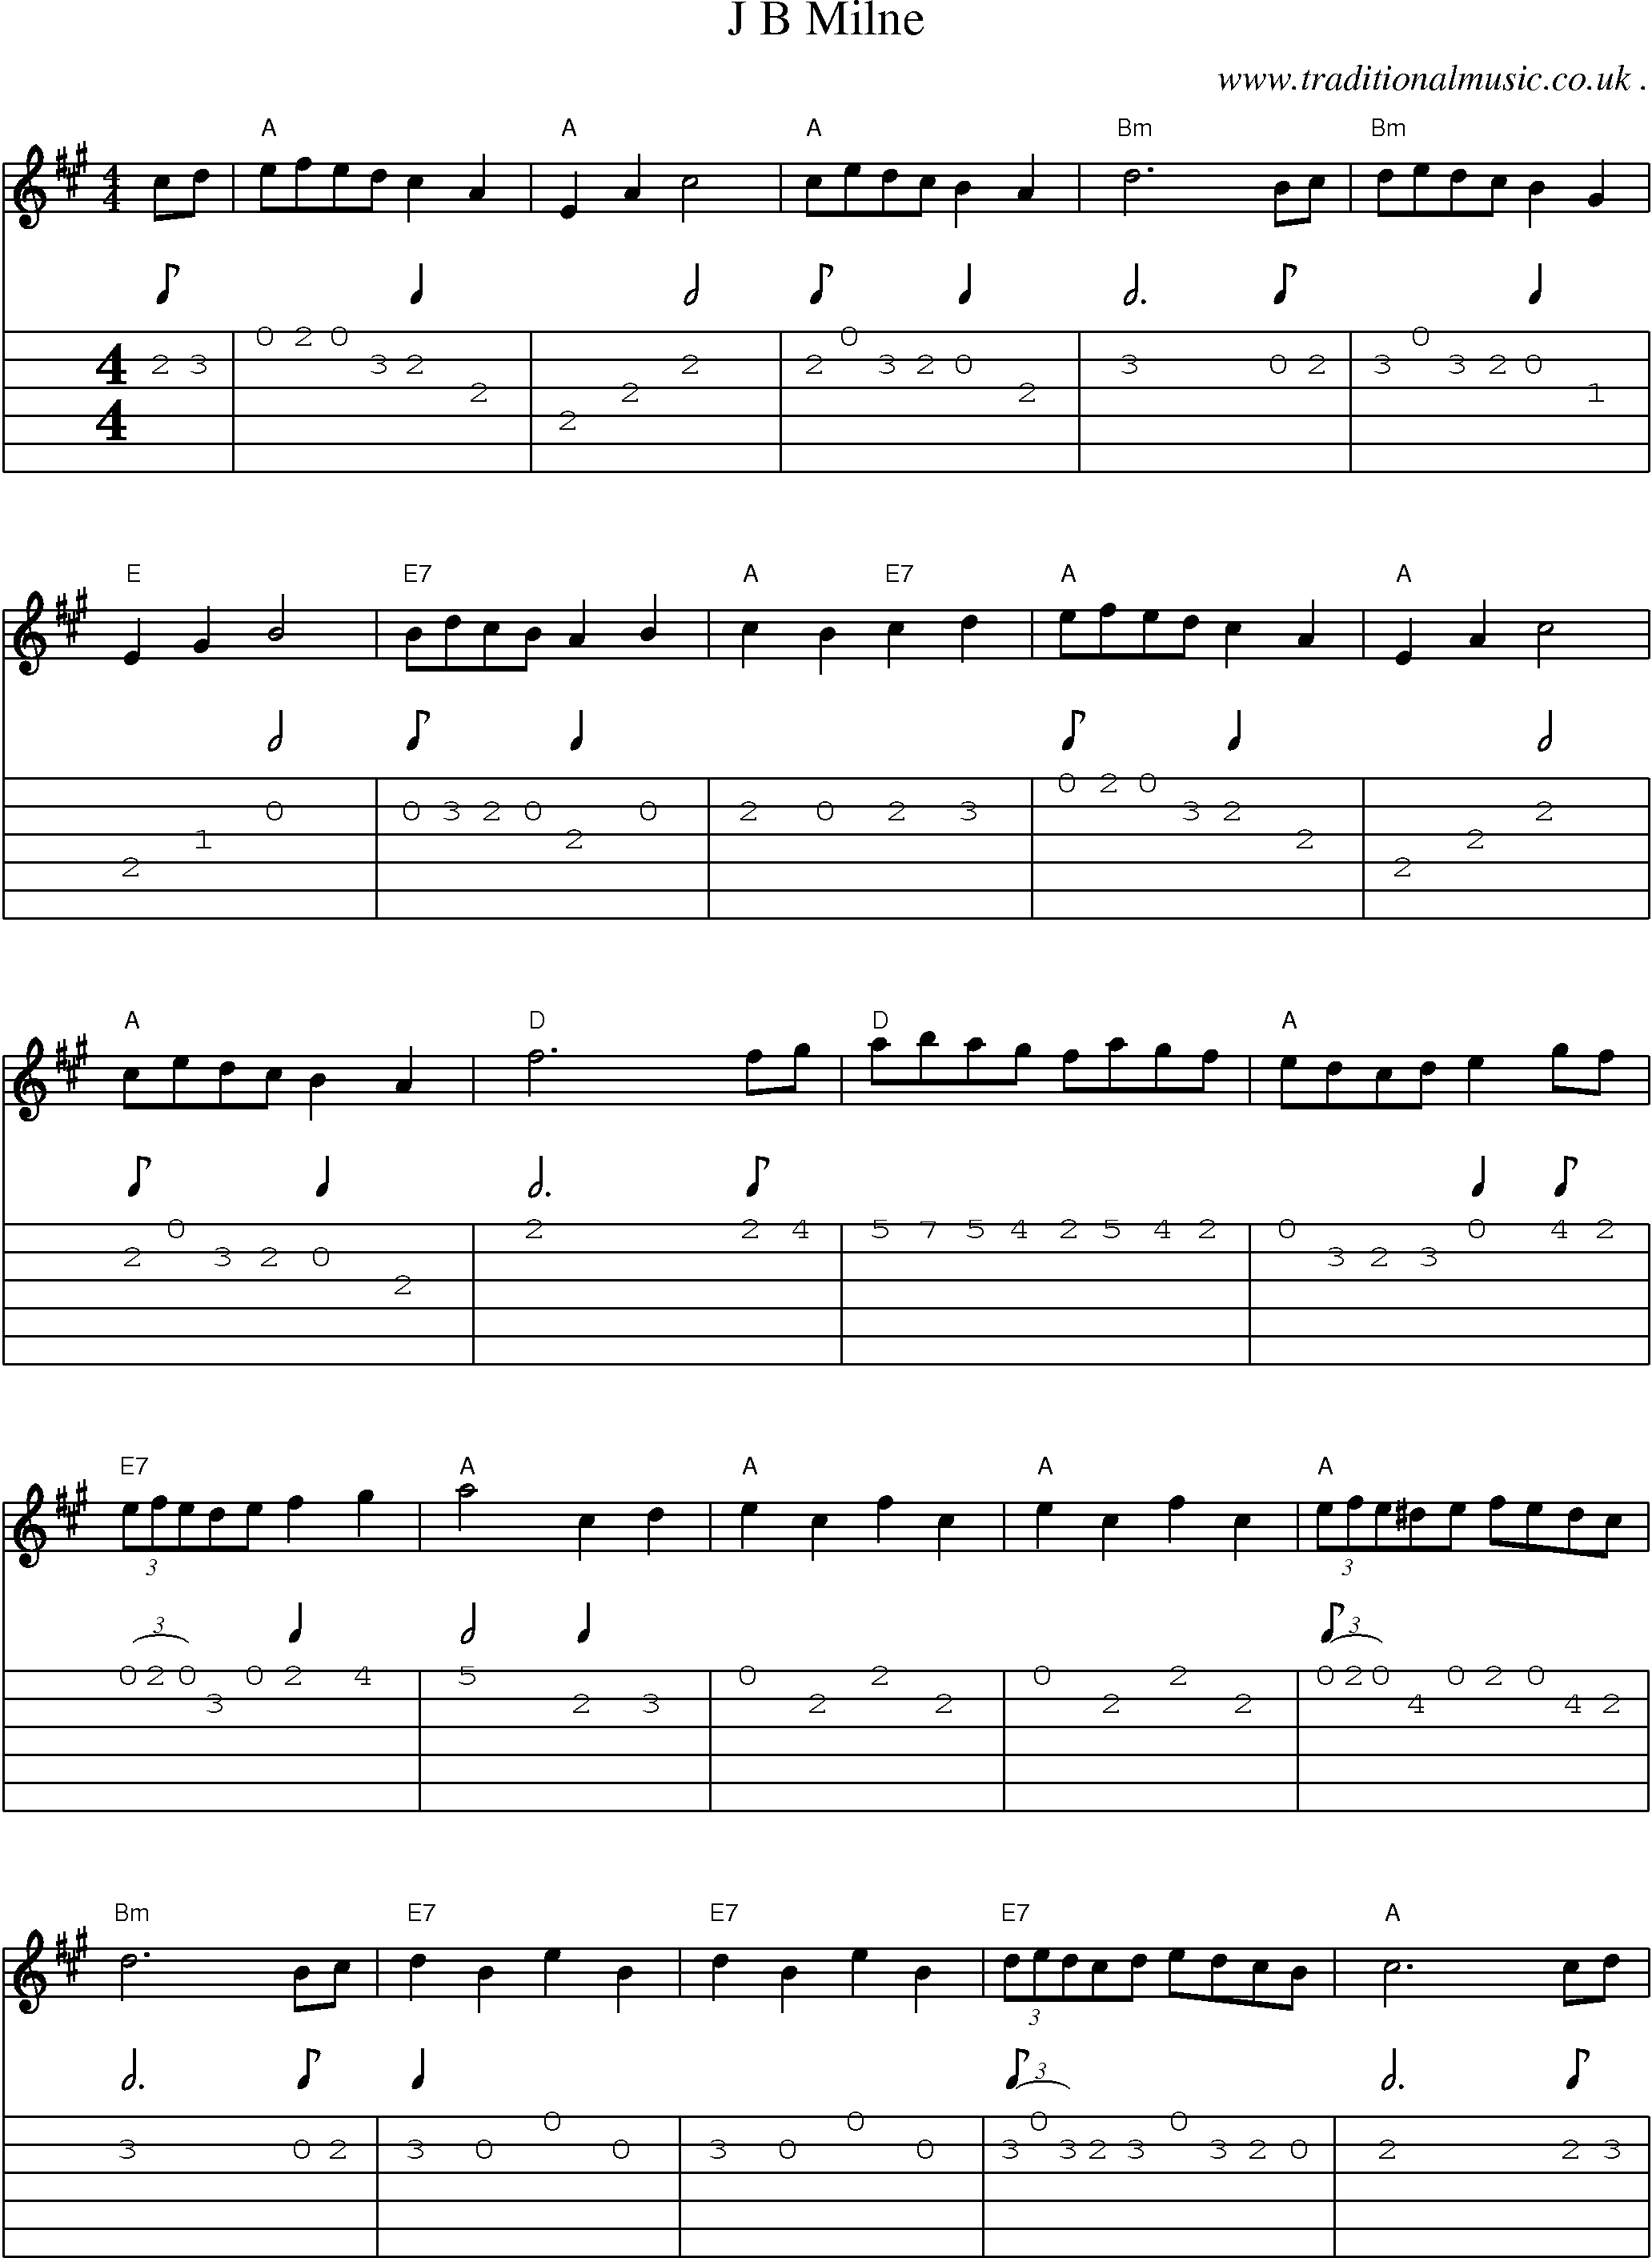 Sheet-Music and Guitar Tabs for J B Milne